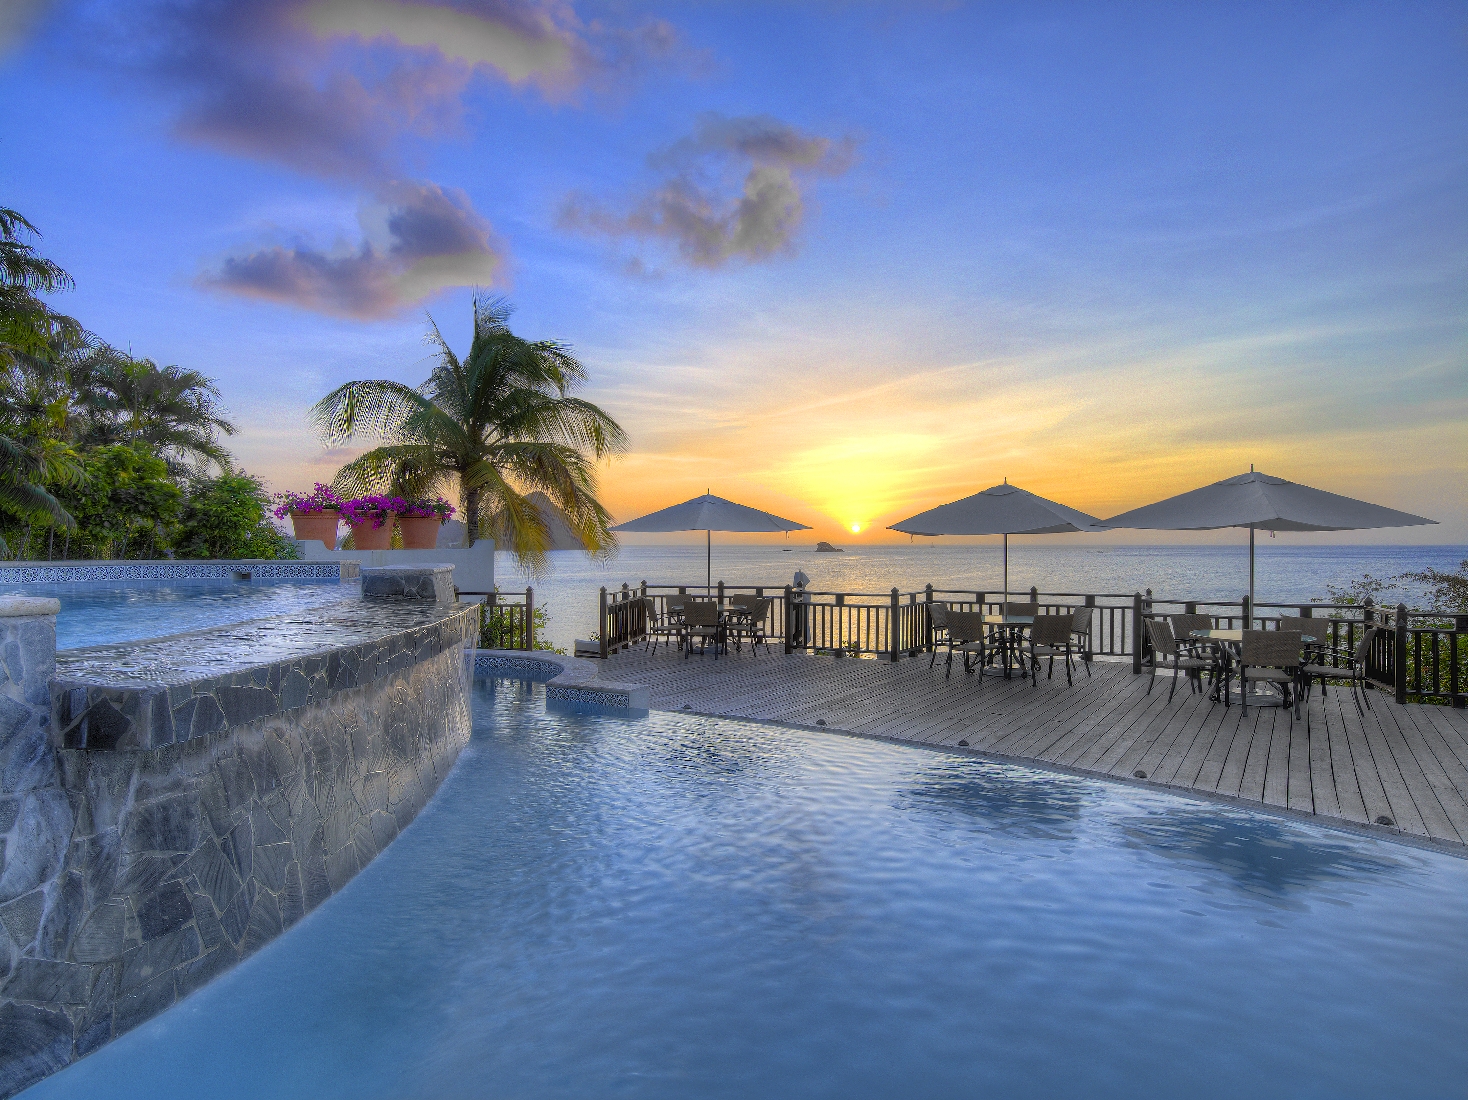 Sunset seen from the clifftop swimming pool at Cap Maison, St. Lucia